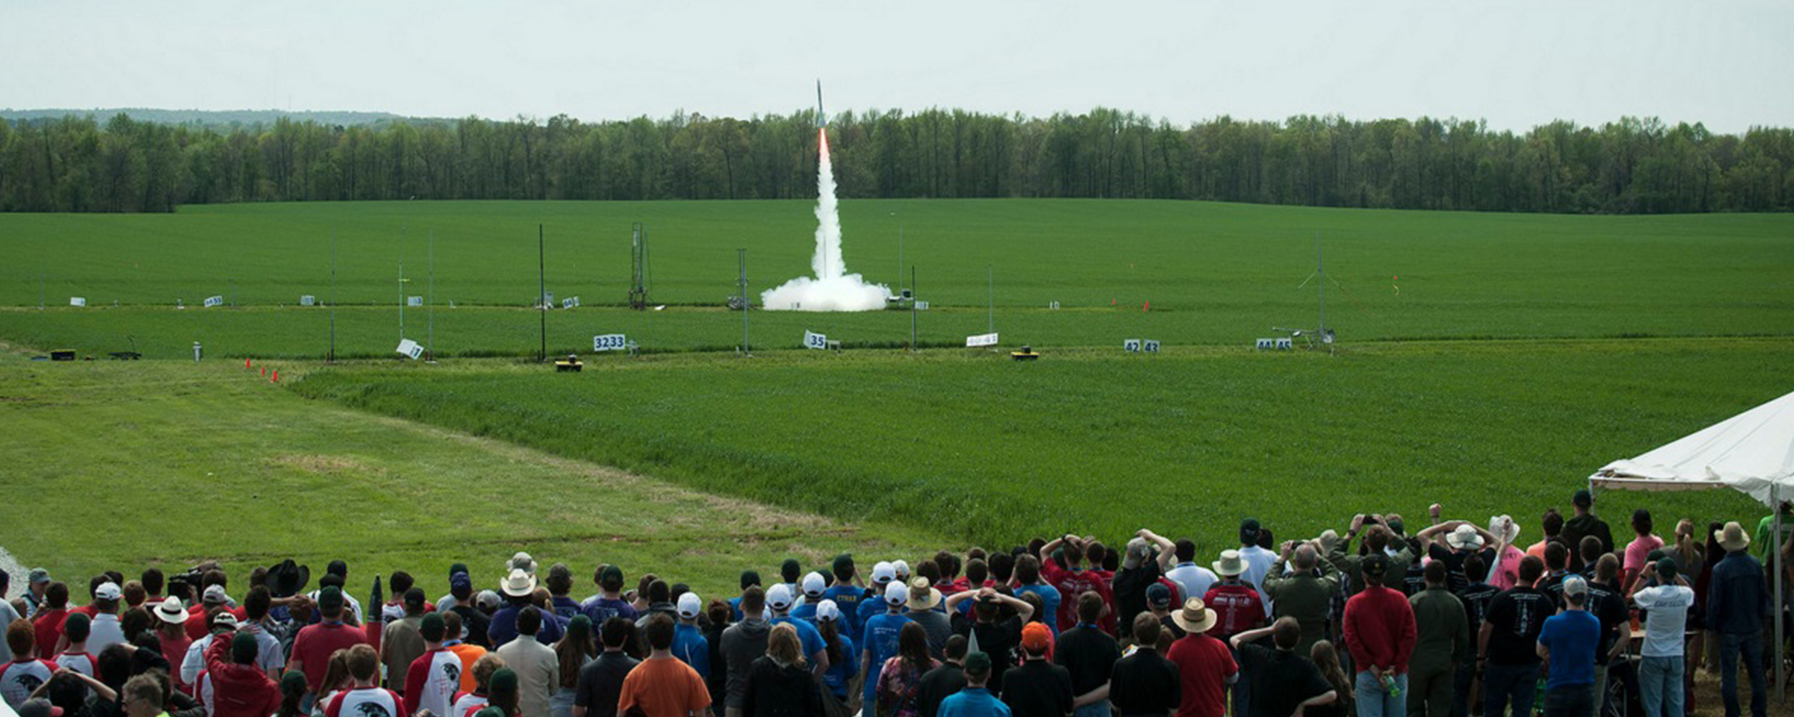 Student-Made Rocket Launches as a Crowd Watches